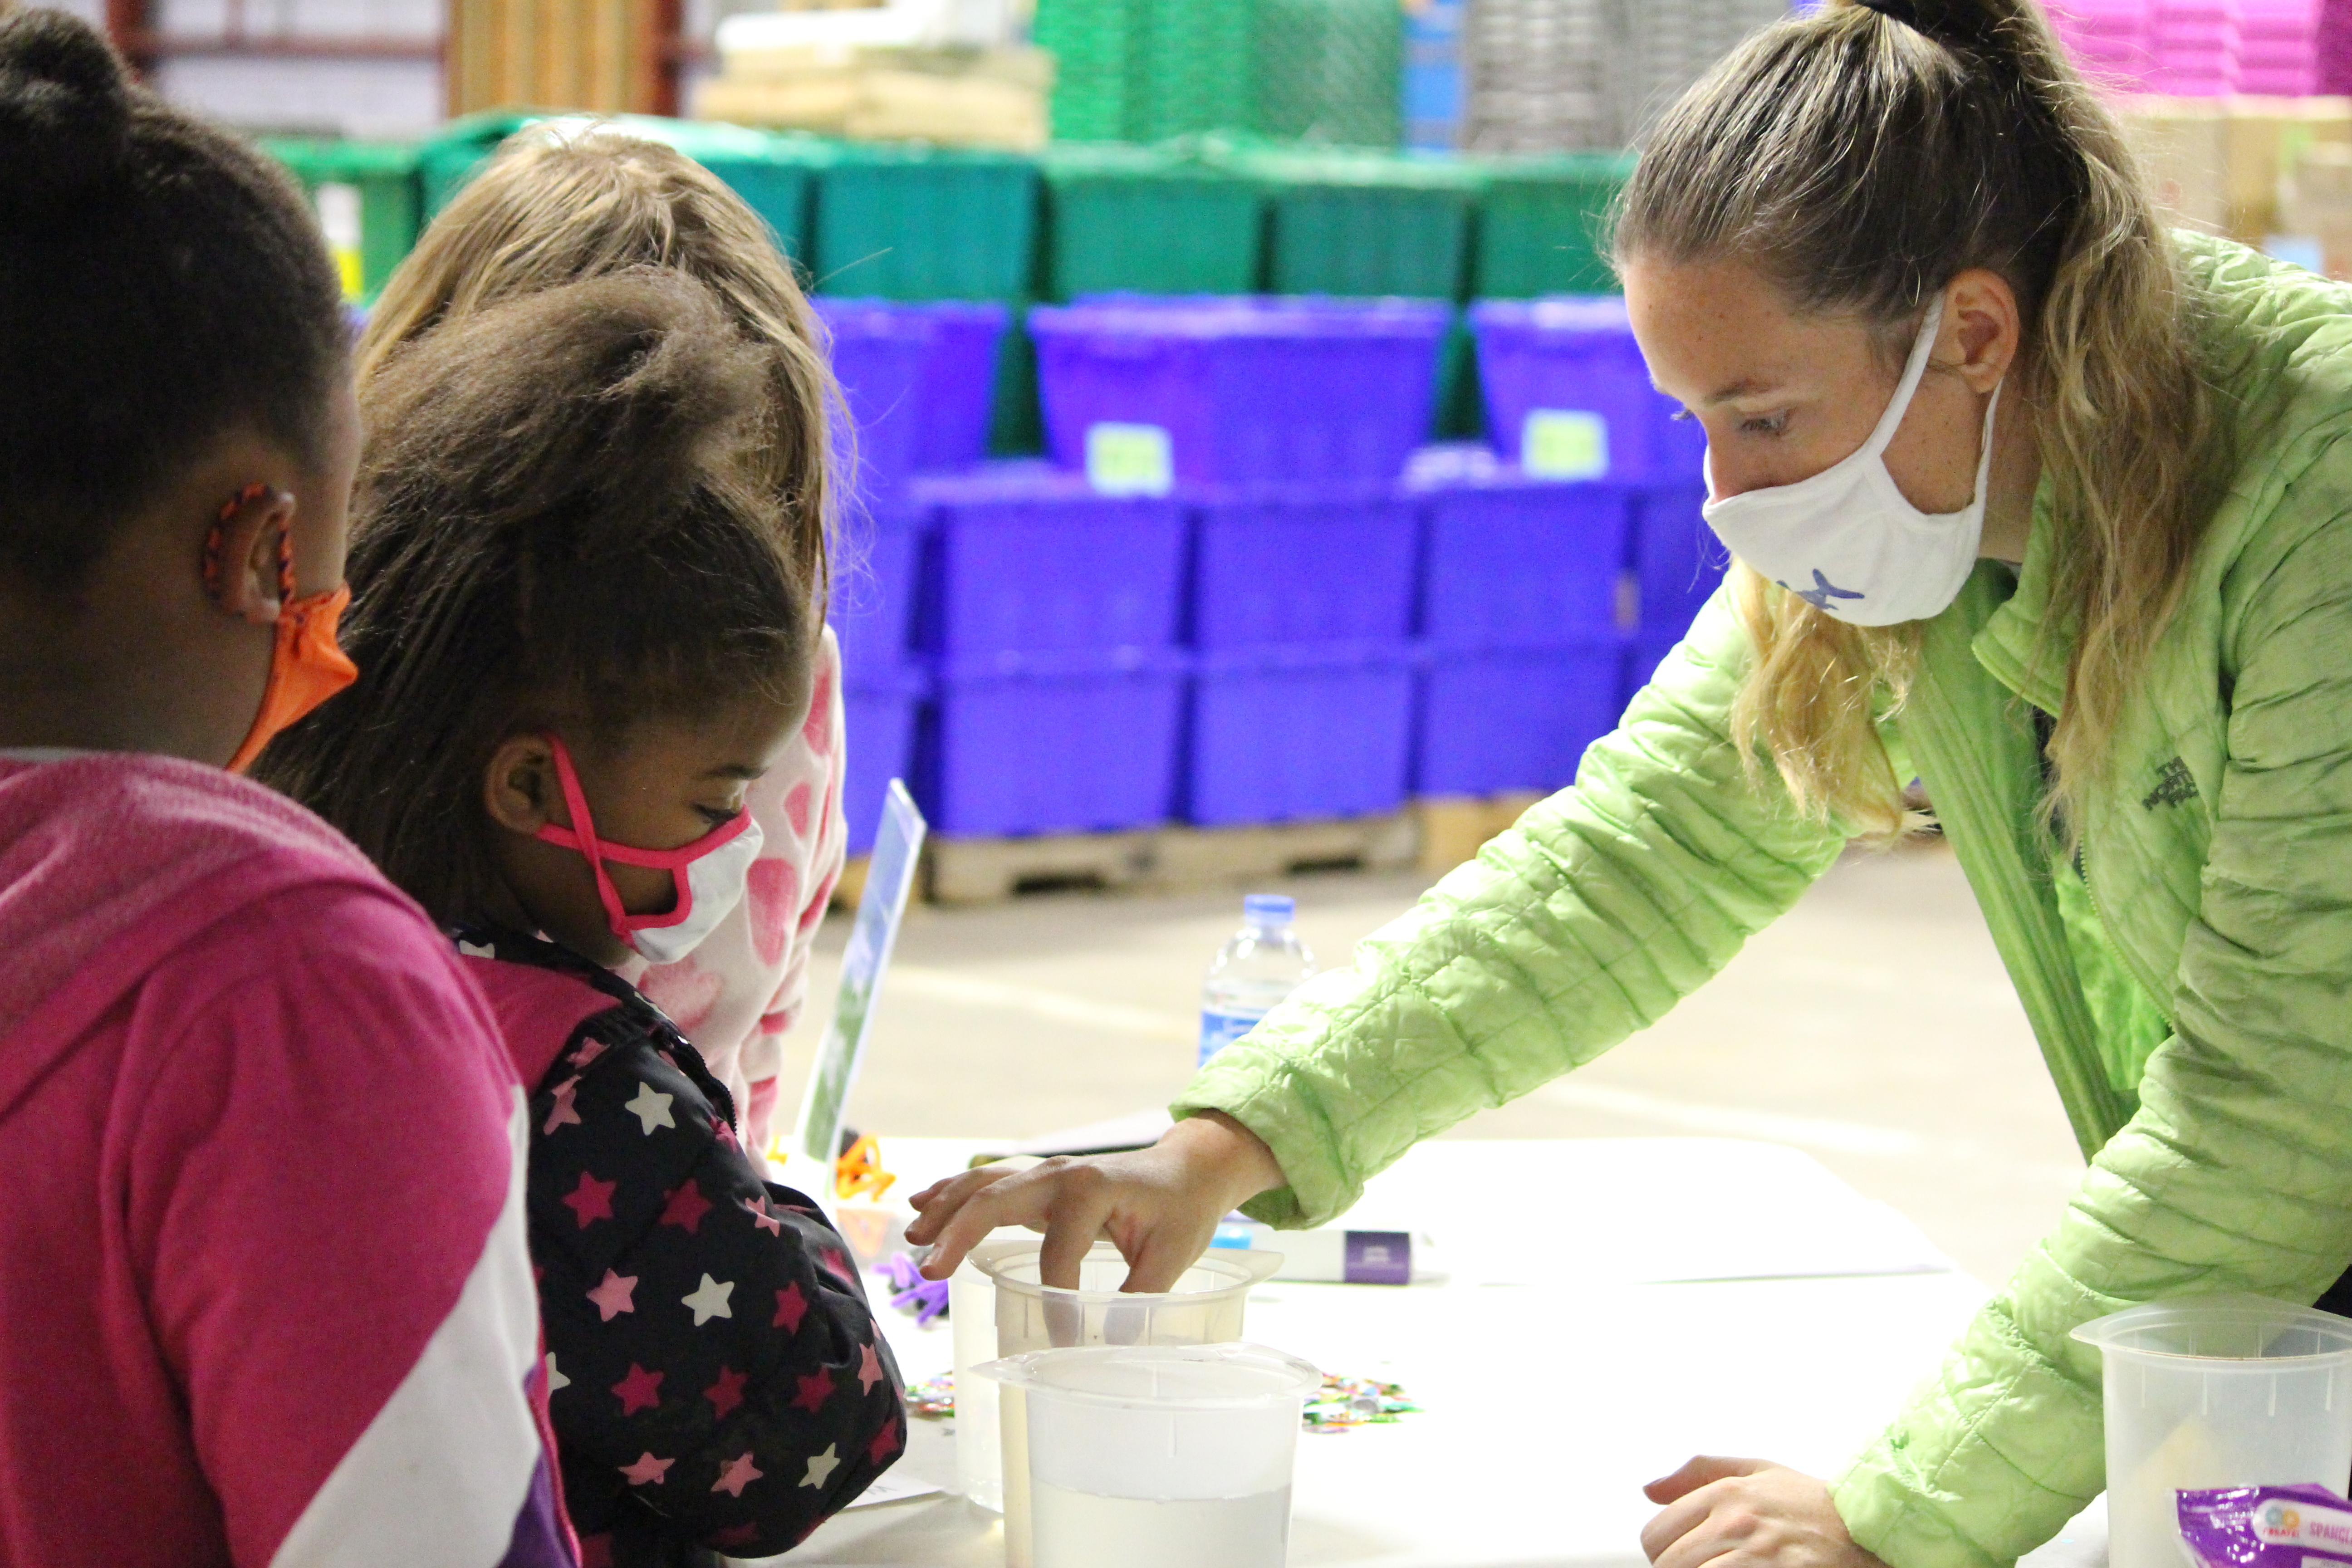 Volunteer showing students an activity with two containers of liquid